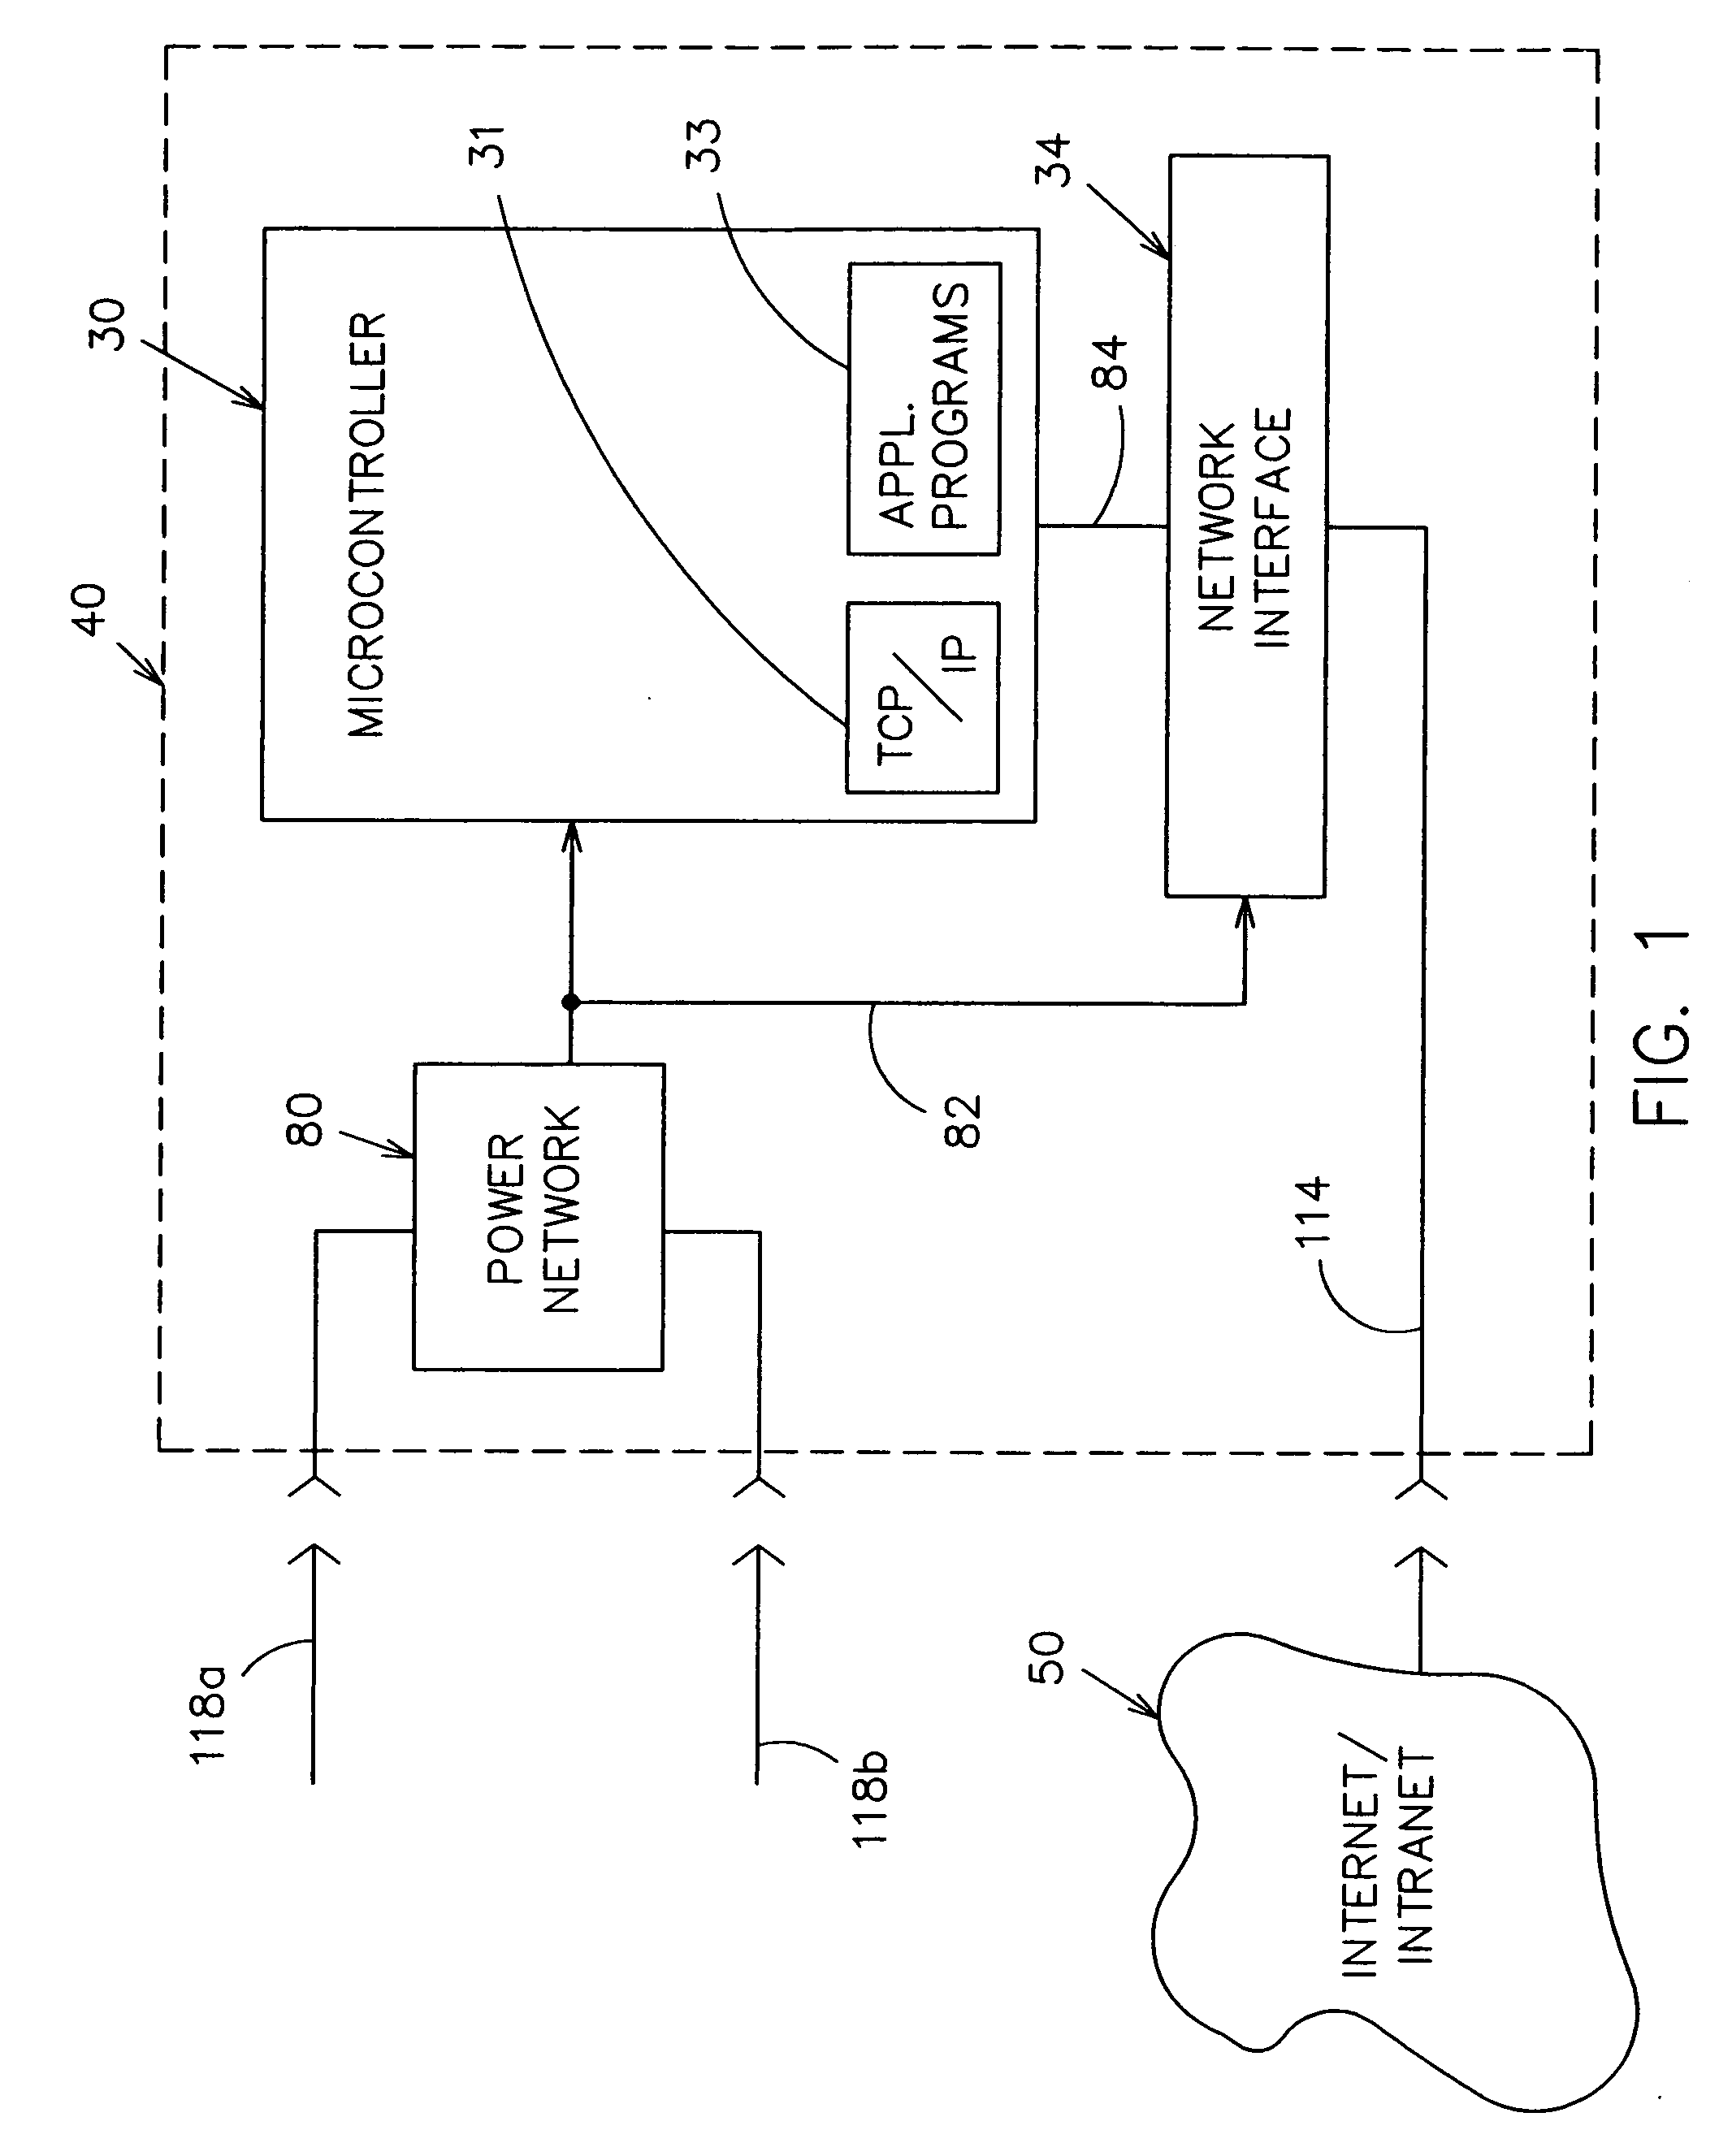 Internet/intranet-connected apparatus